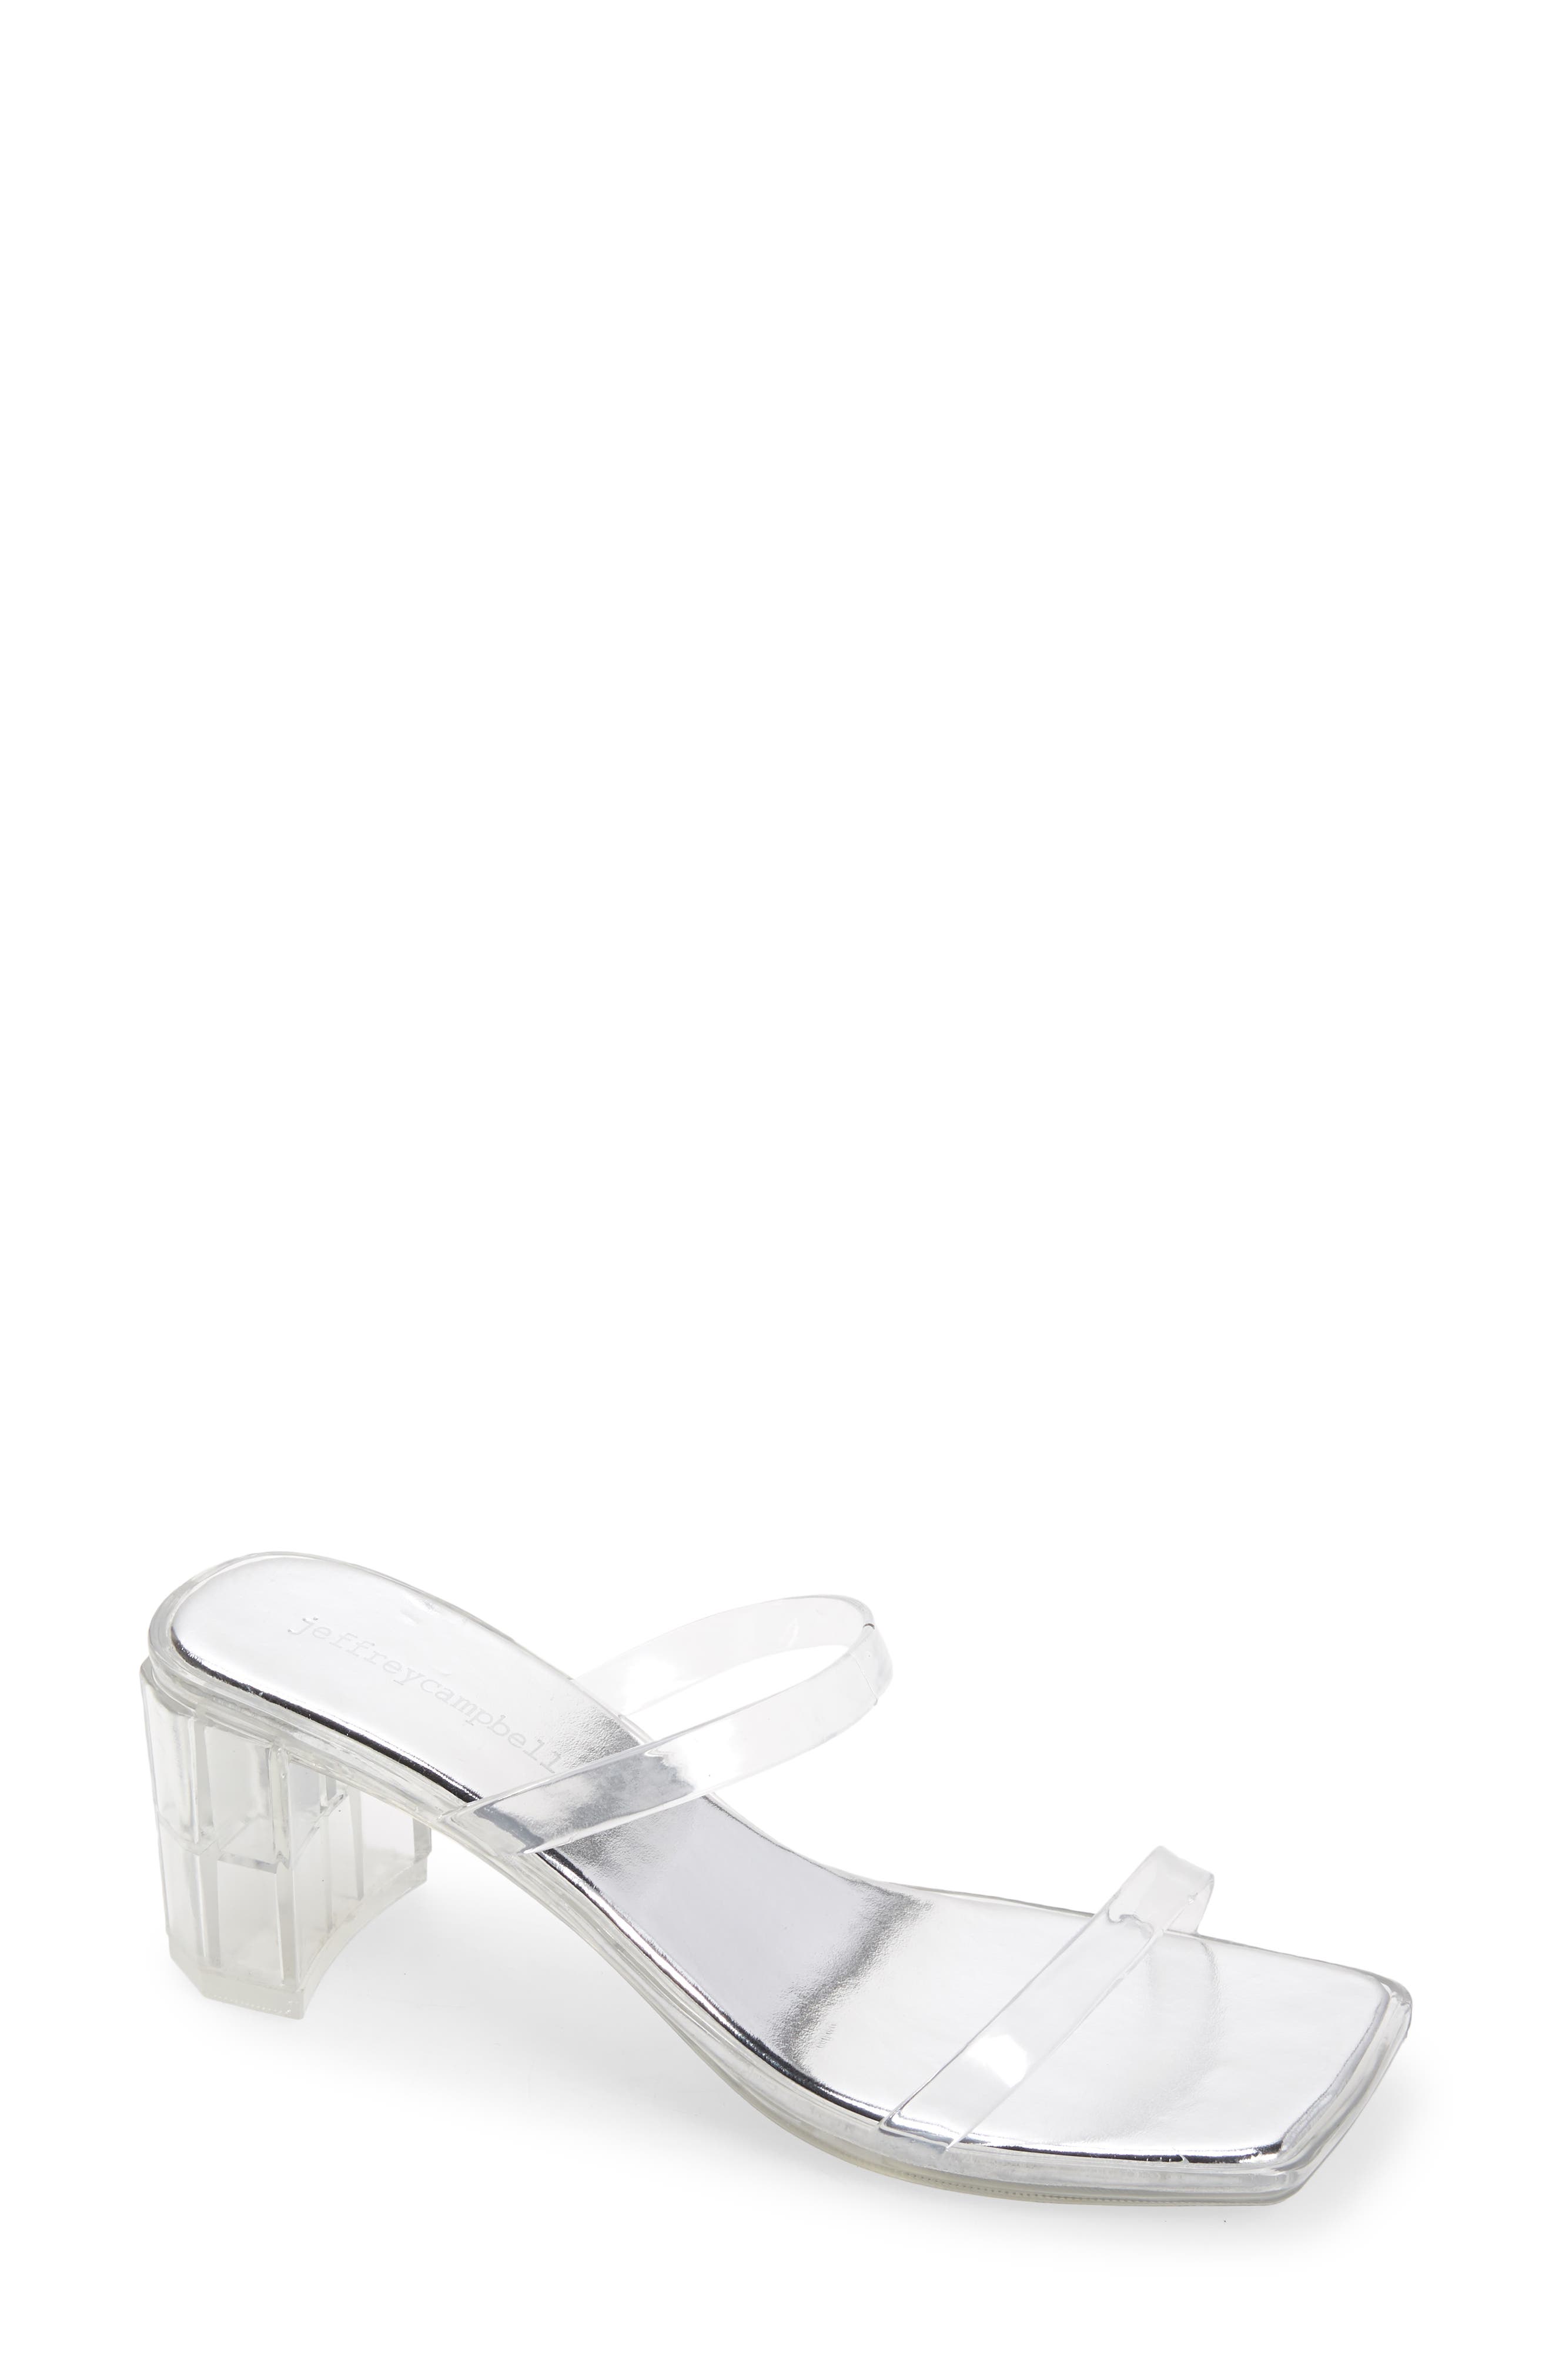 jeffrey campbell mules nordstrom